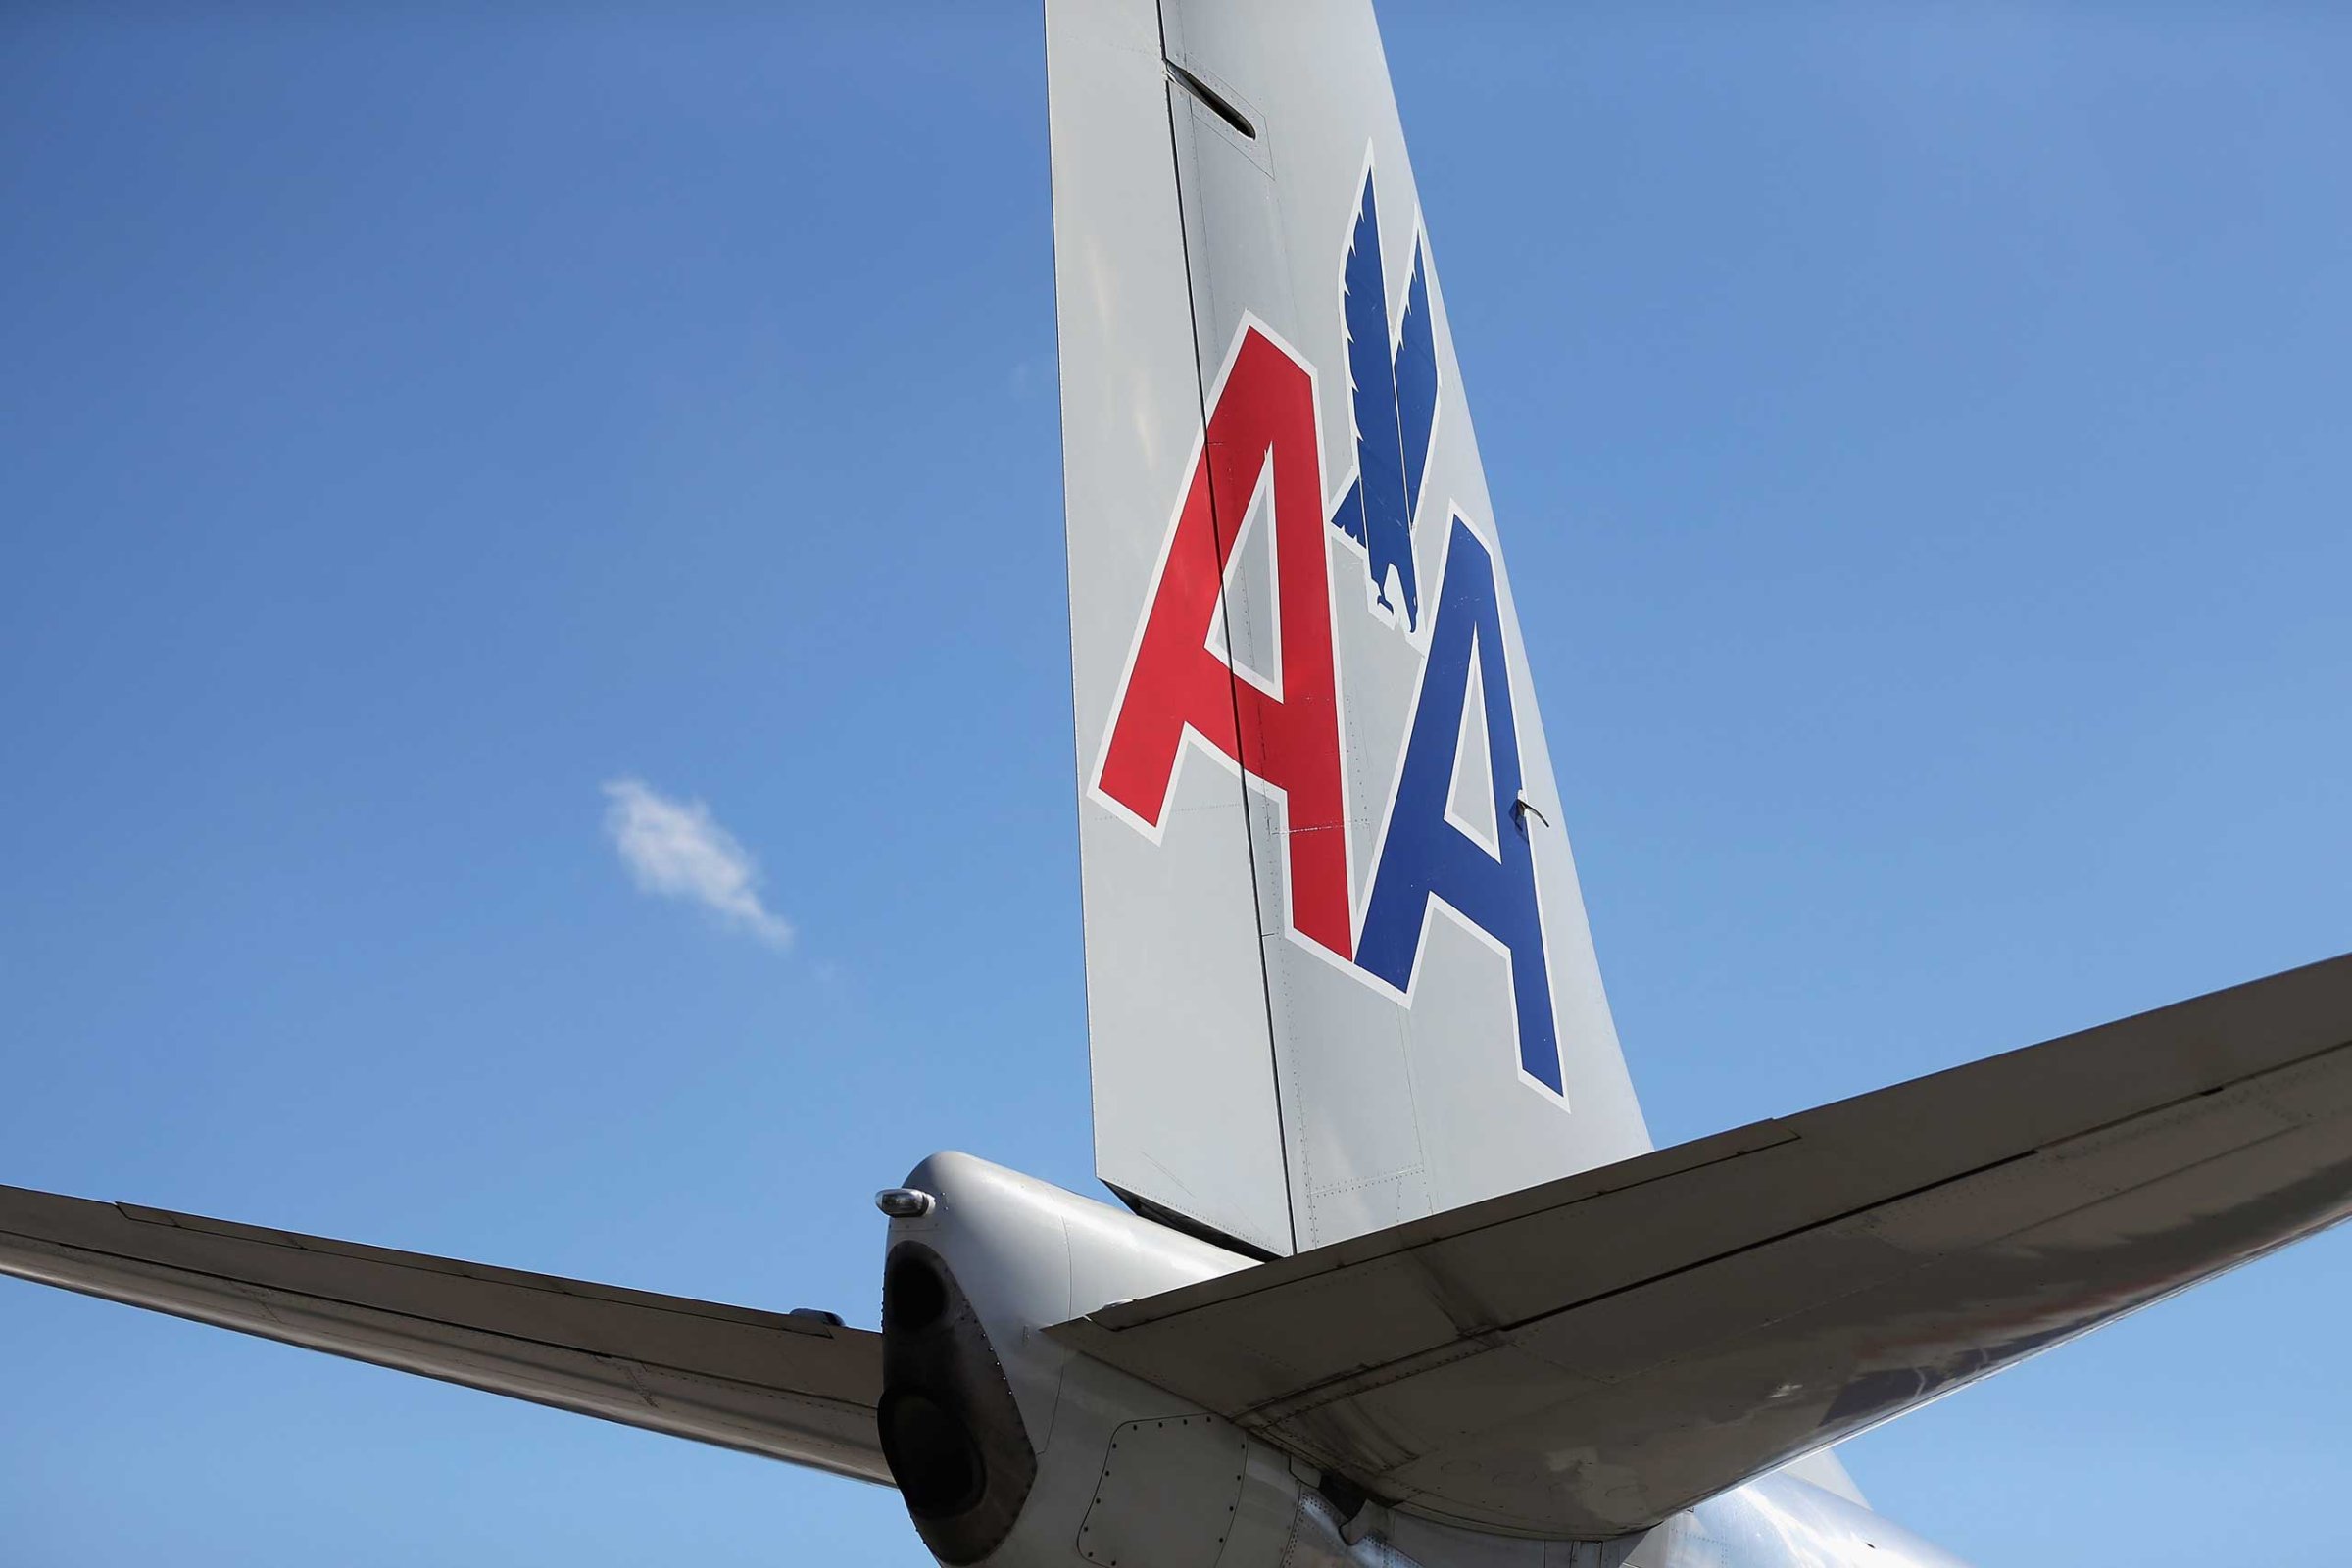 An American Airlines plane is seen at the Miami International Airport in Miami in 2013.